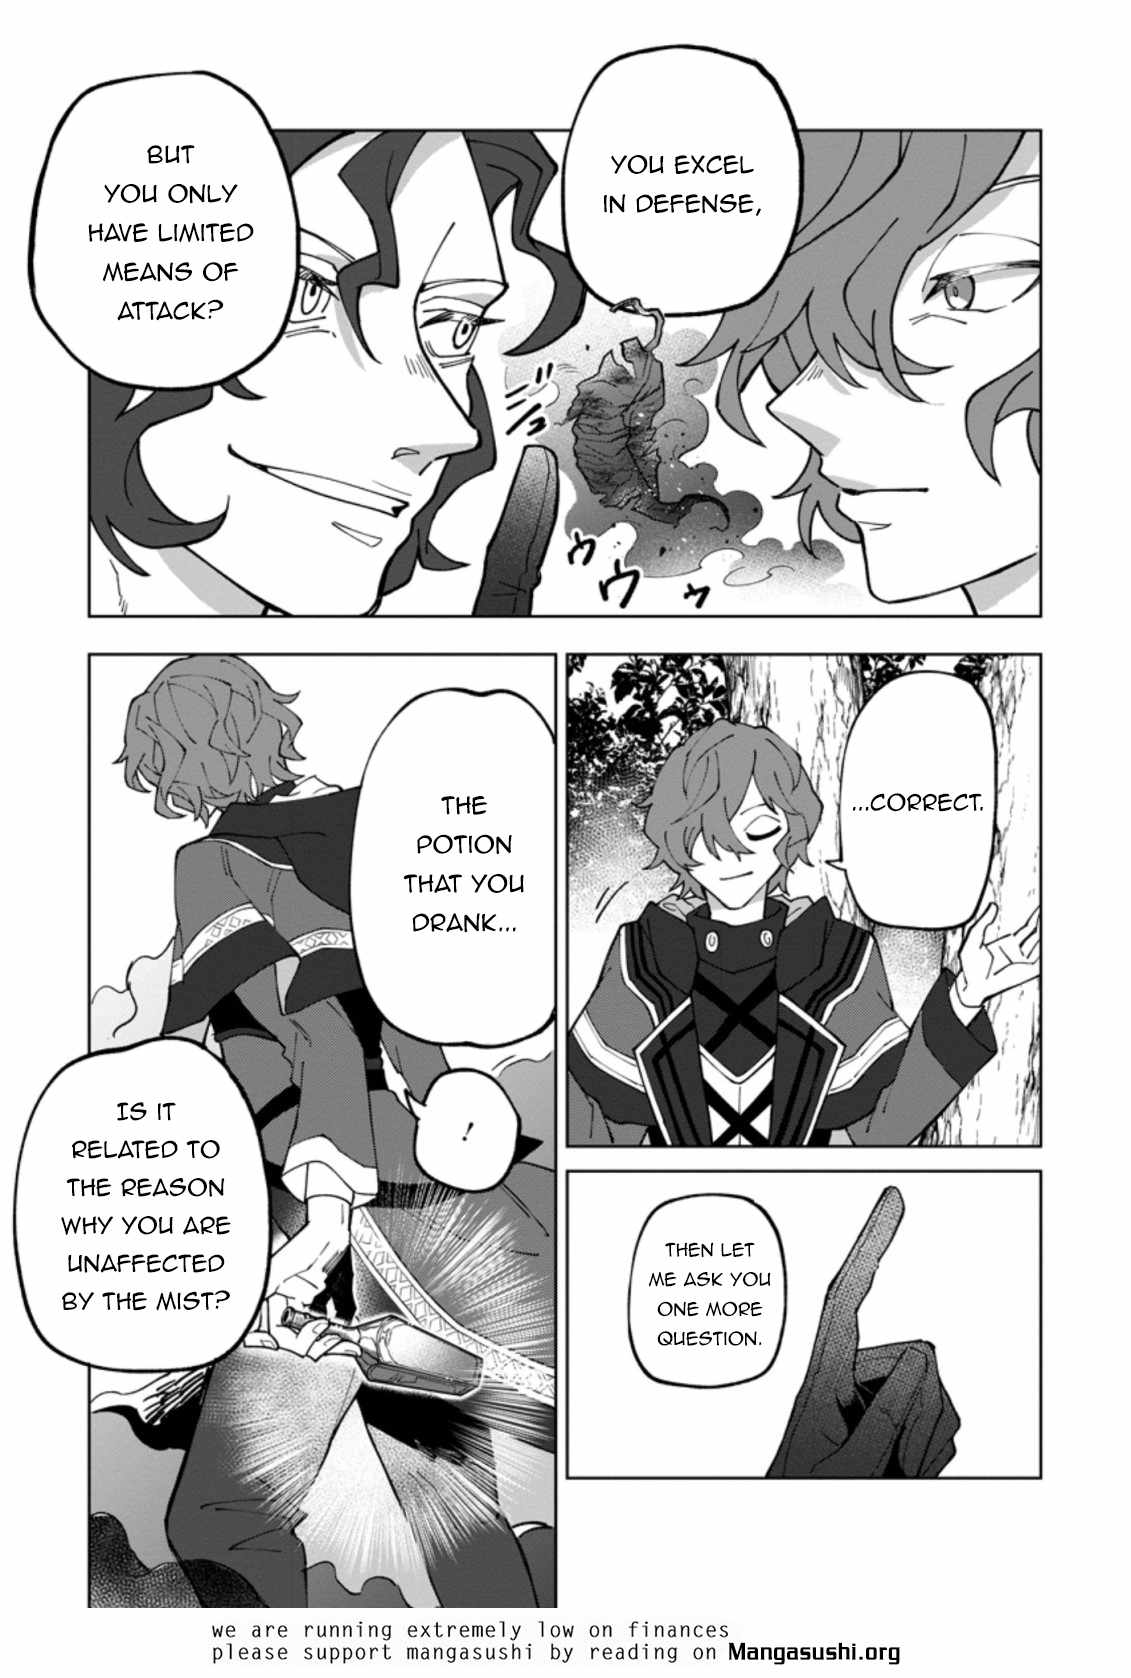 The White Mage Who Was Banished From the Hero's Party Is Picked up by an S Rank Adventurer ~ This White Mage Is Too Out of the Ordinary! Chapter 17-1-eng-li - Page 11